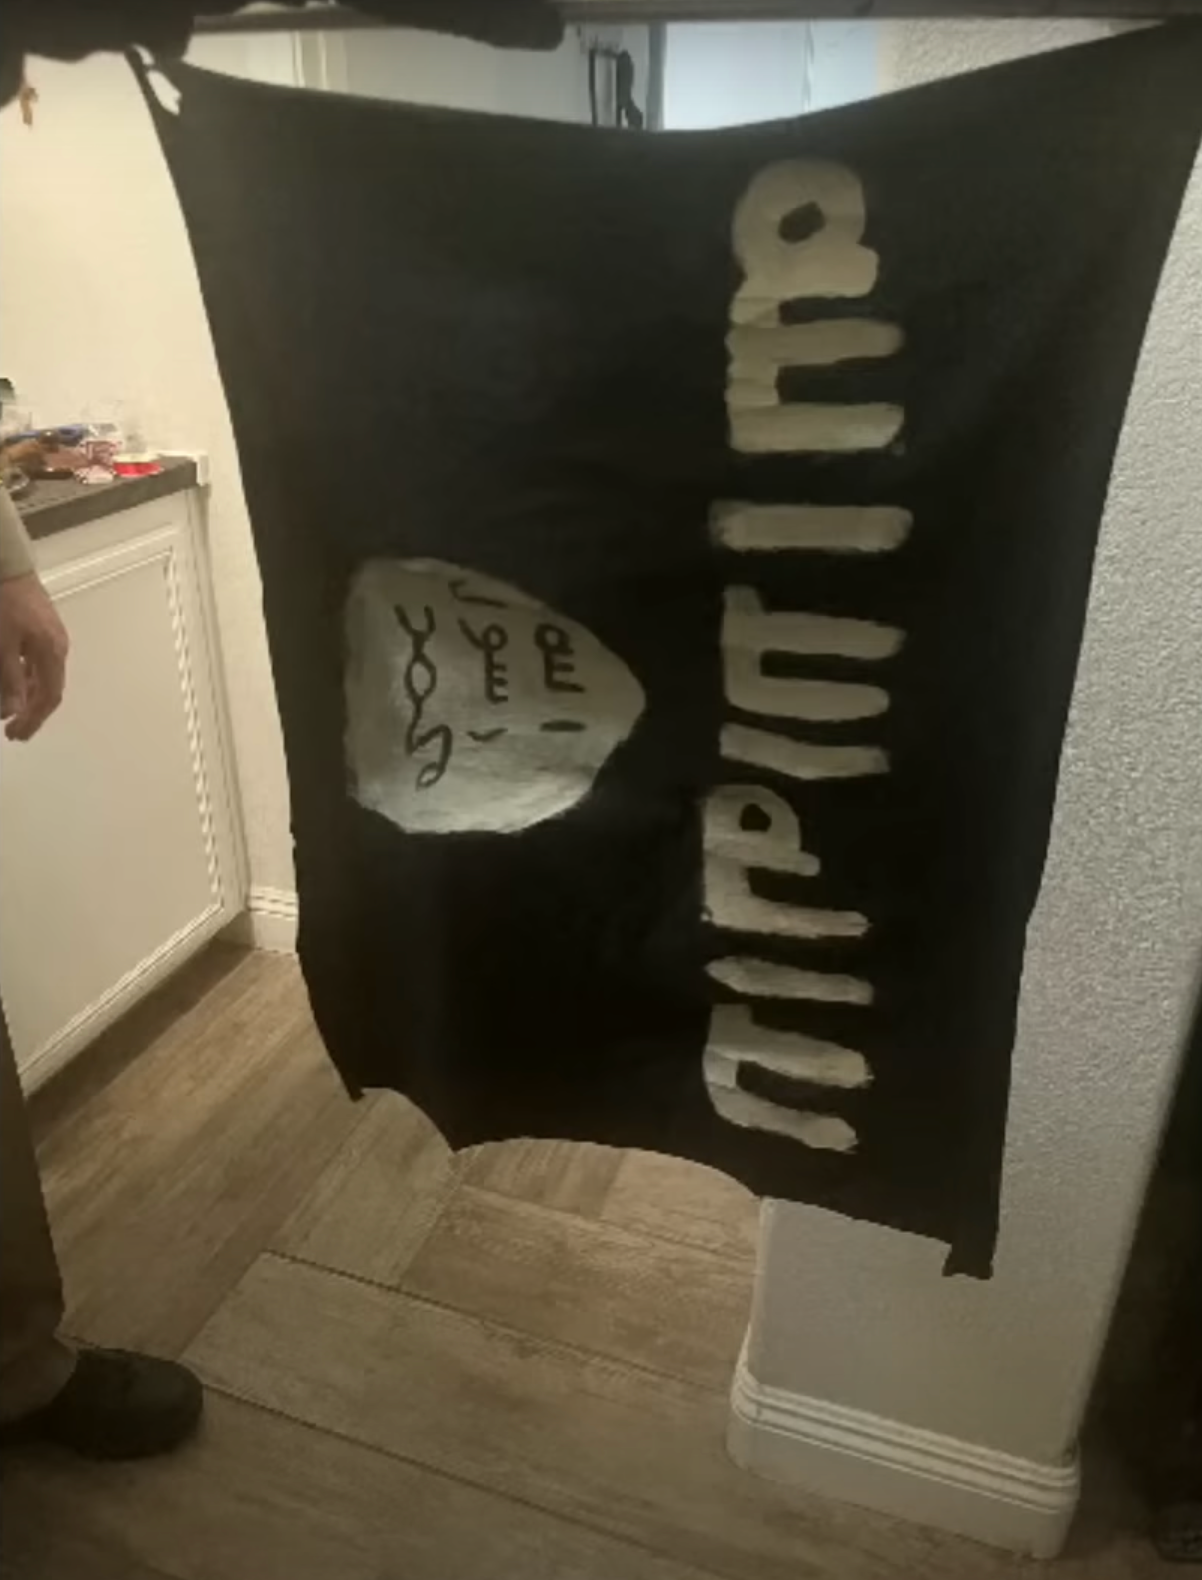 A handmade Isis flag recovered at the home of a teenager in Las Vegas